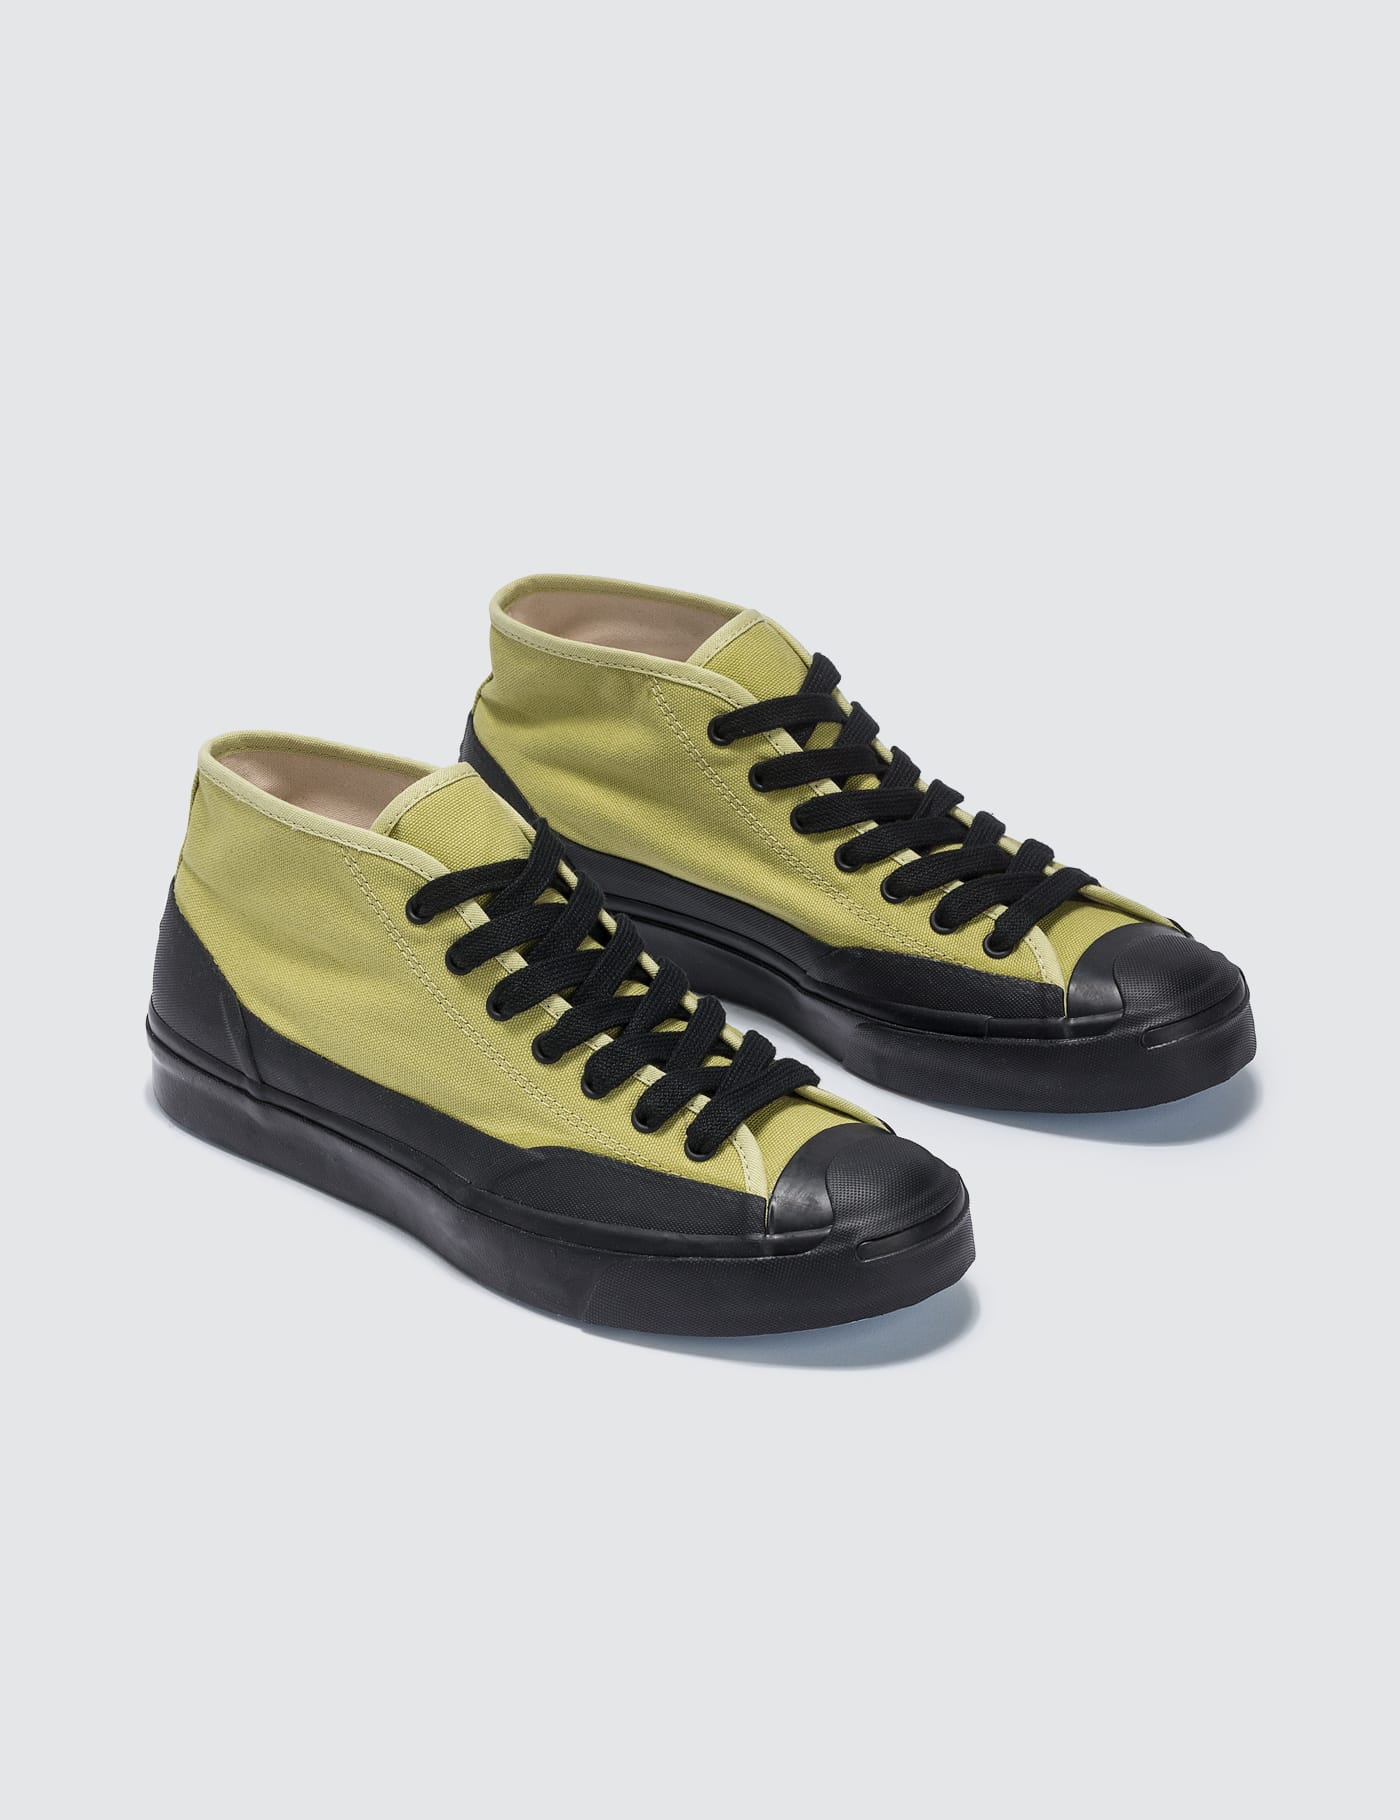 converse jack purcell asap nast